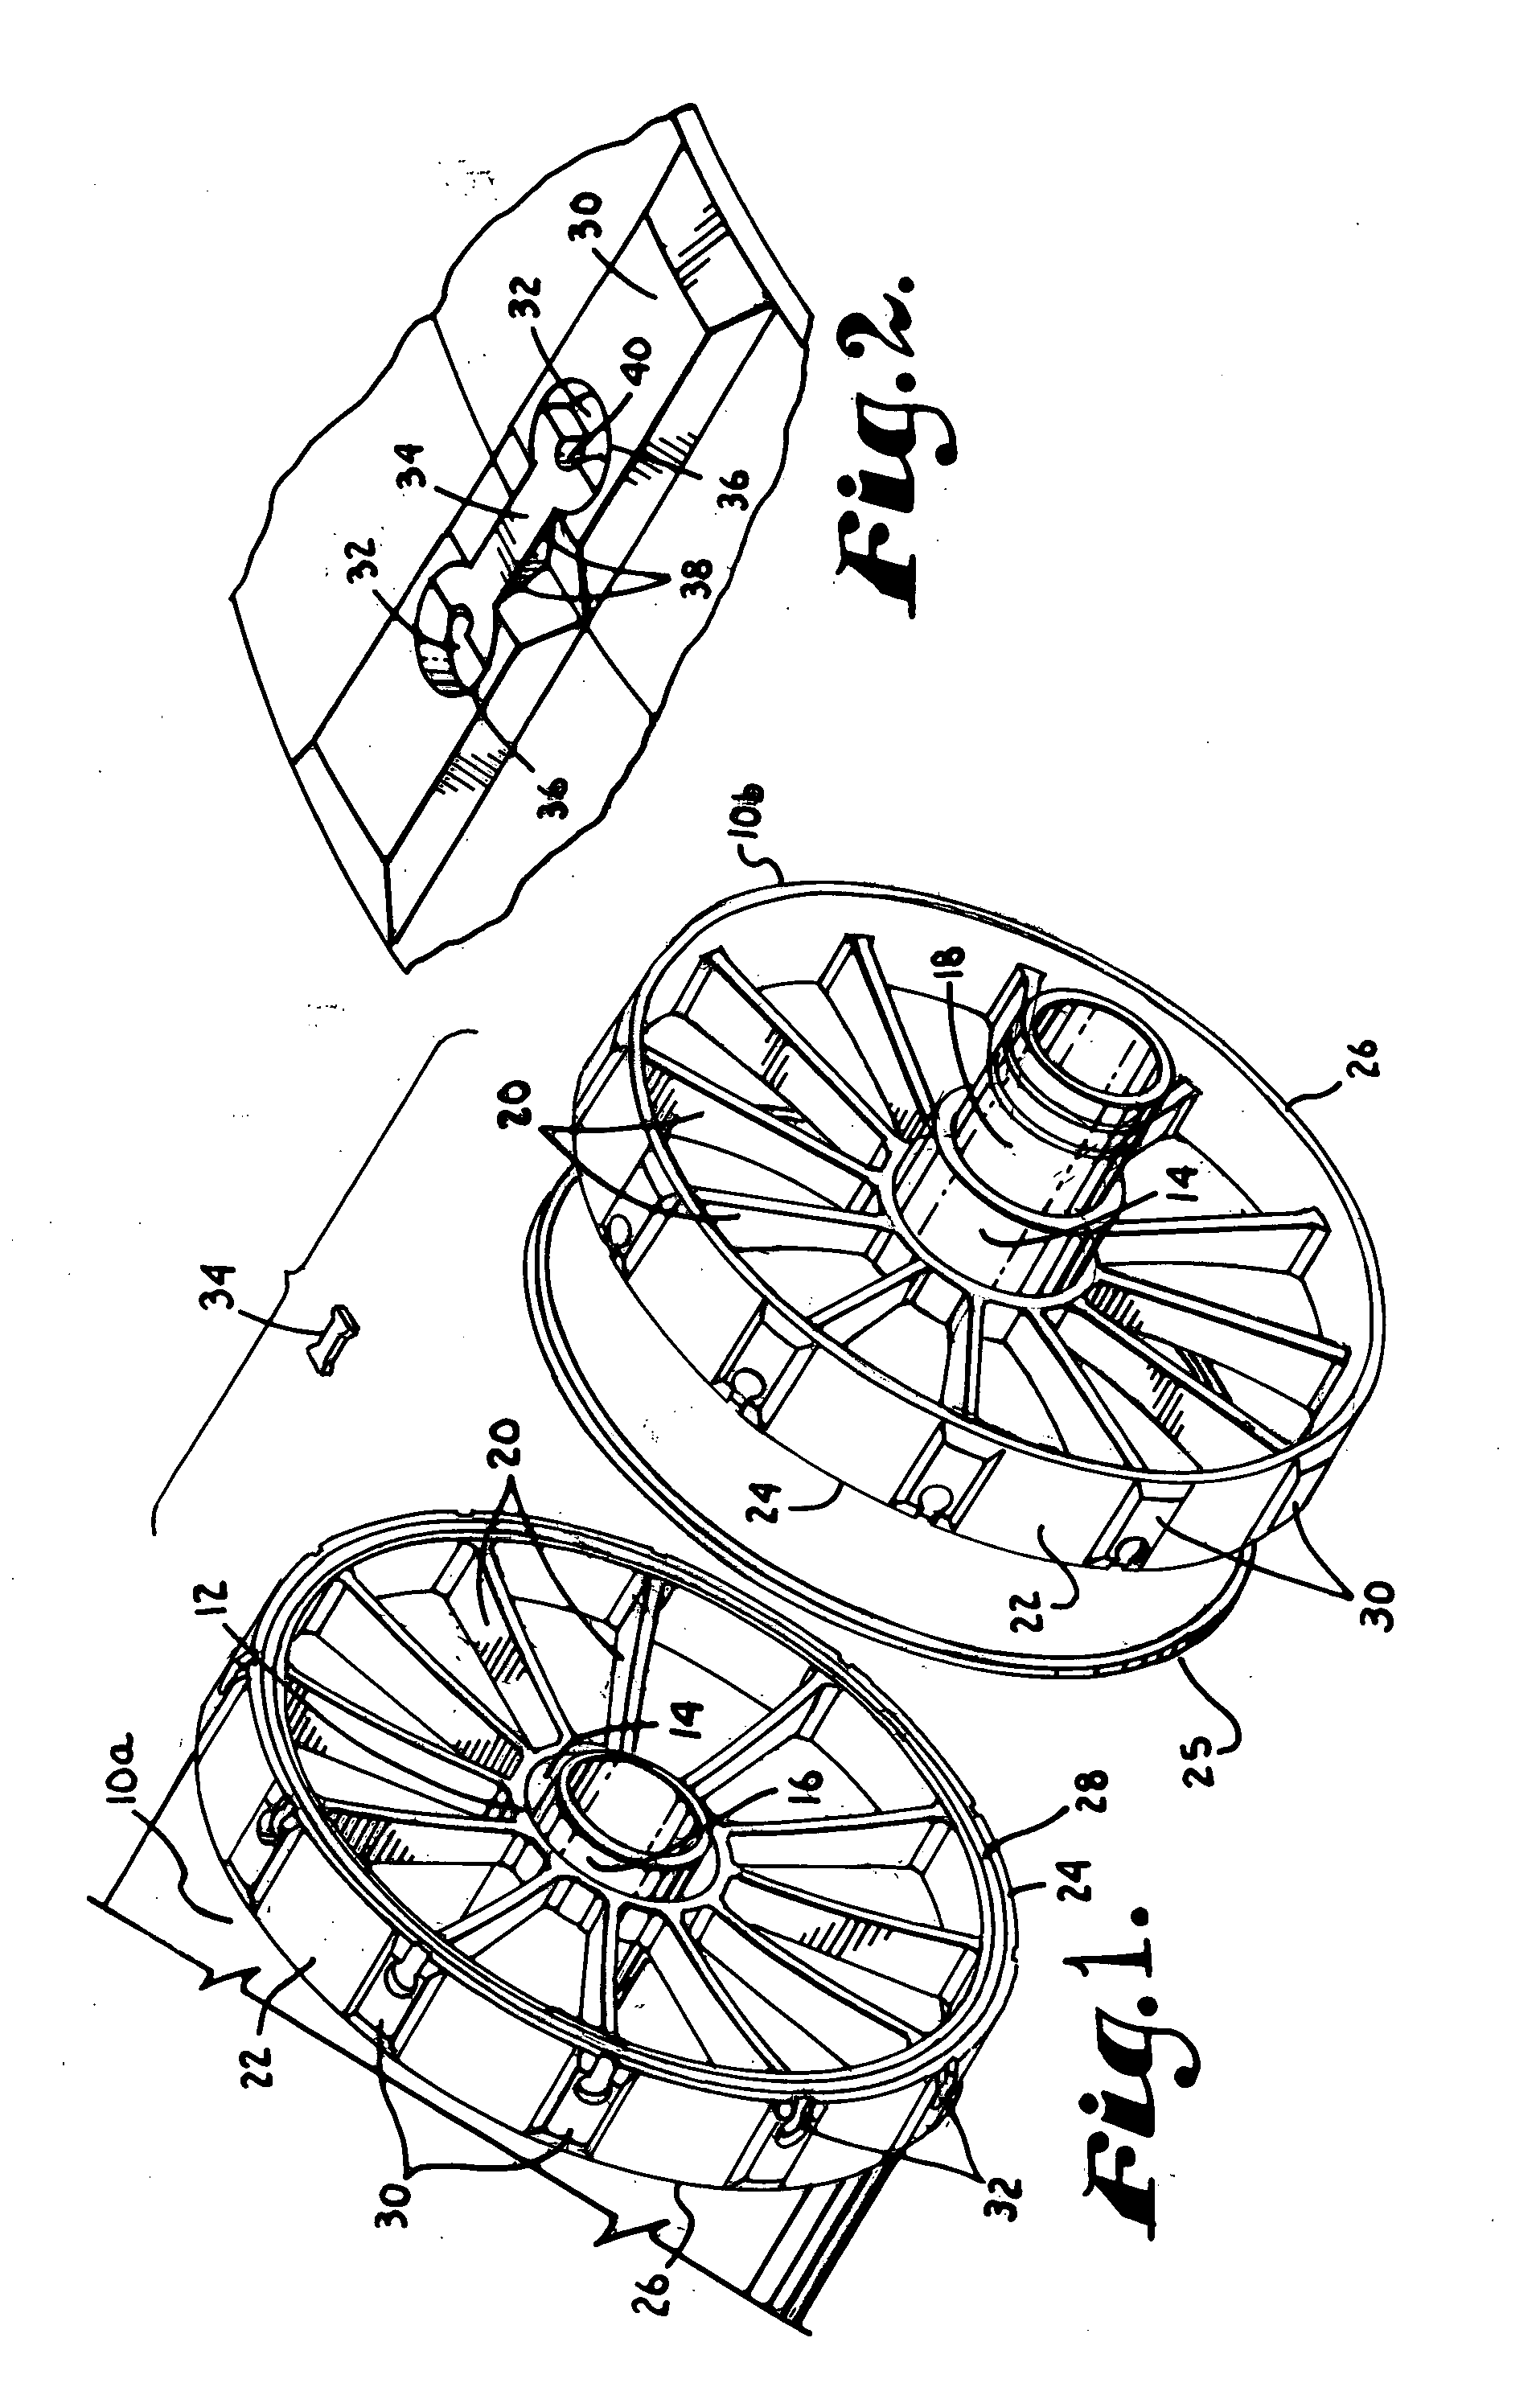 Filtration element and method of constructing a filtration assembly